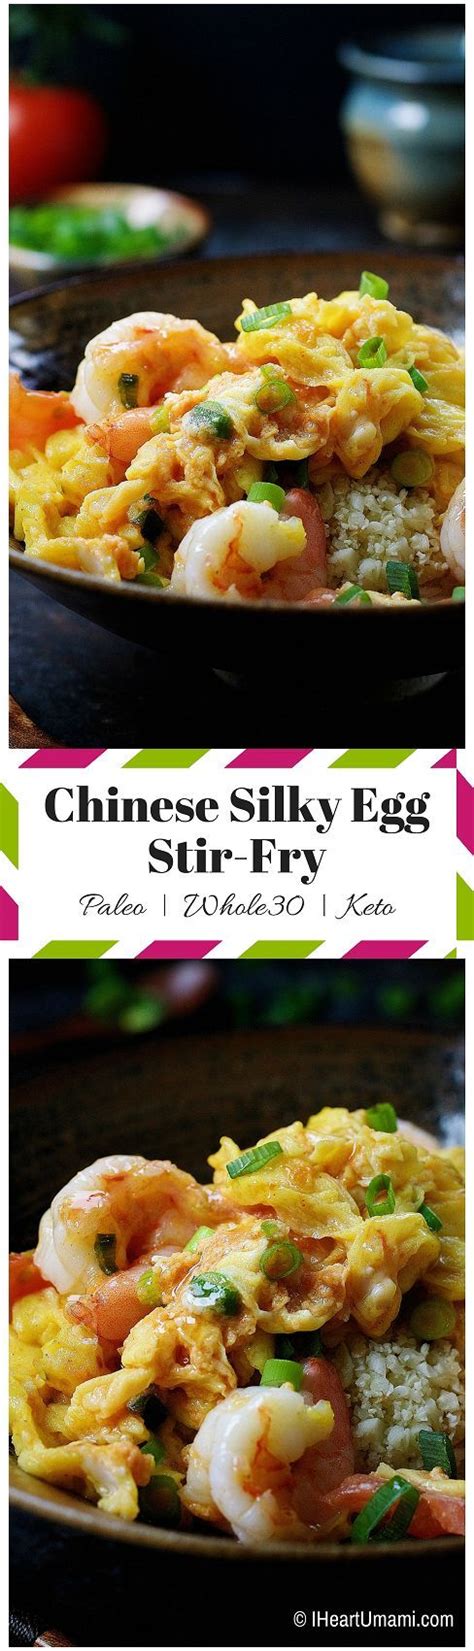 Today, i'm sharing a recipe that features a whopping 7 cancer fighters: Paleo Chinese Shrimp Tomato Stir Fry | Recipe | Food recipes, Asian recipes, Real food recipes